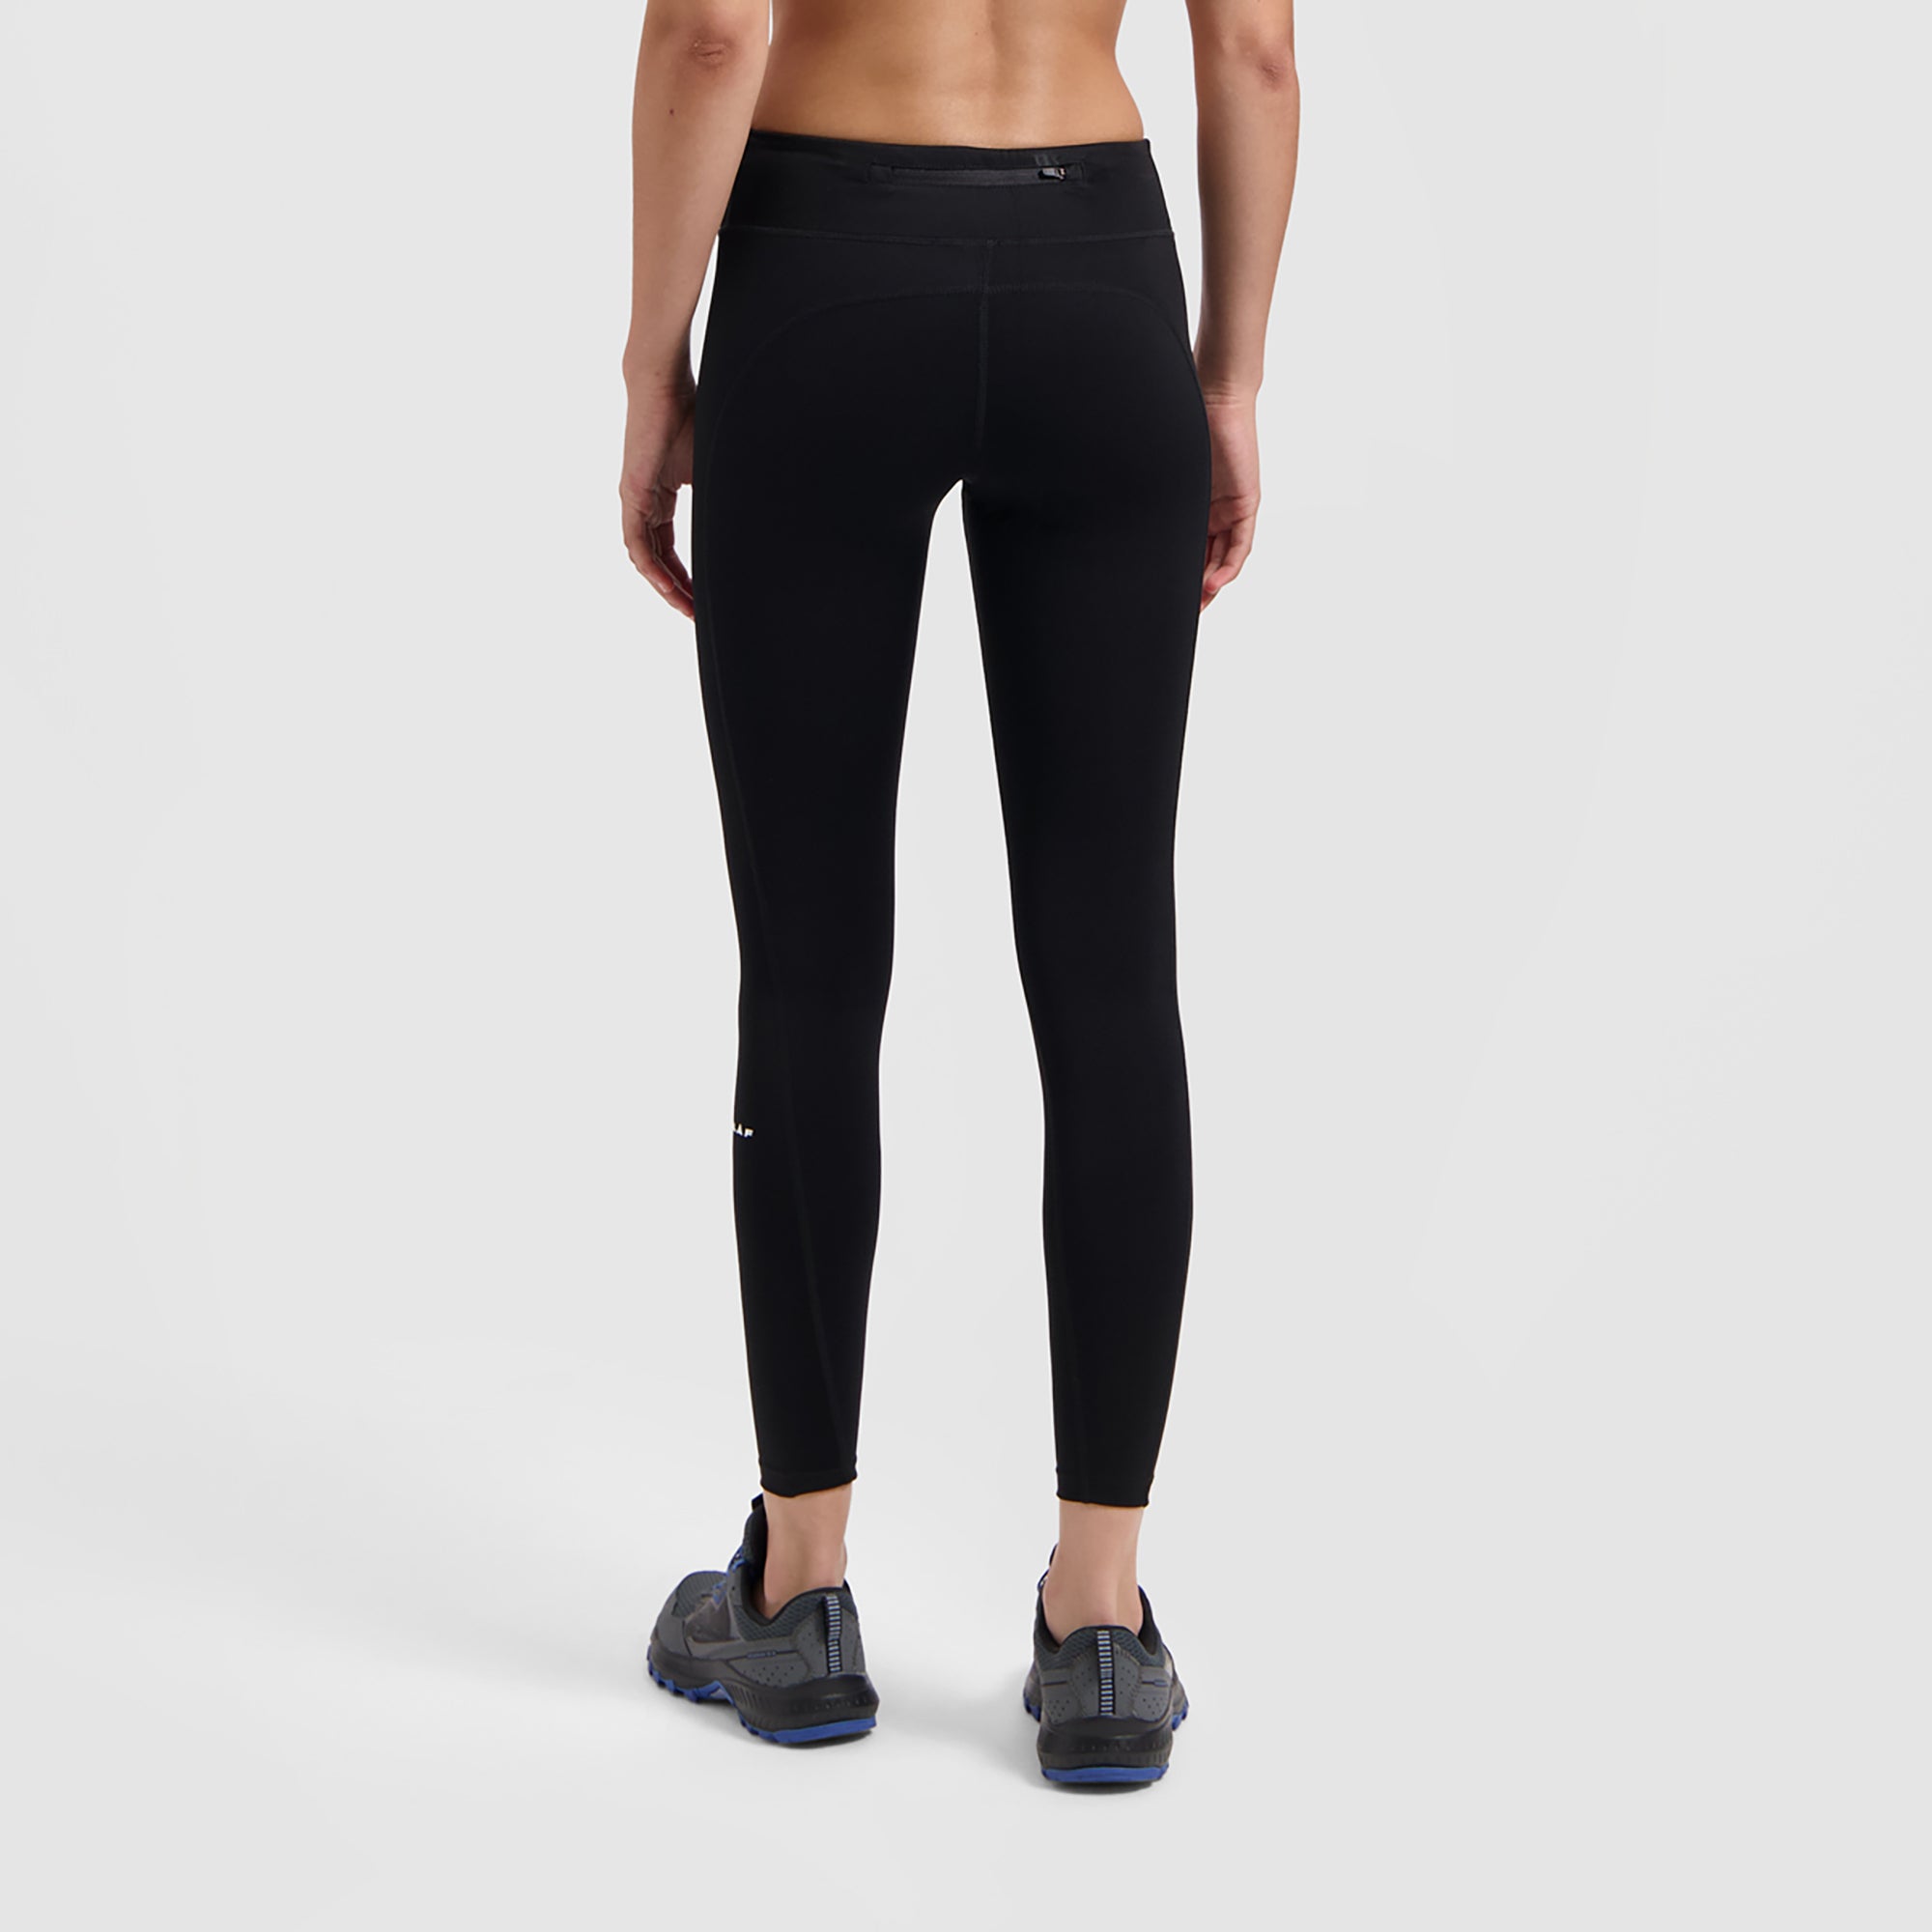 Lululemon Tight Stuff Tight Size 4 - $110 New With Tags - From L